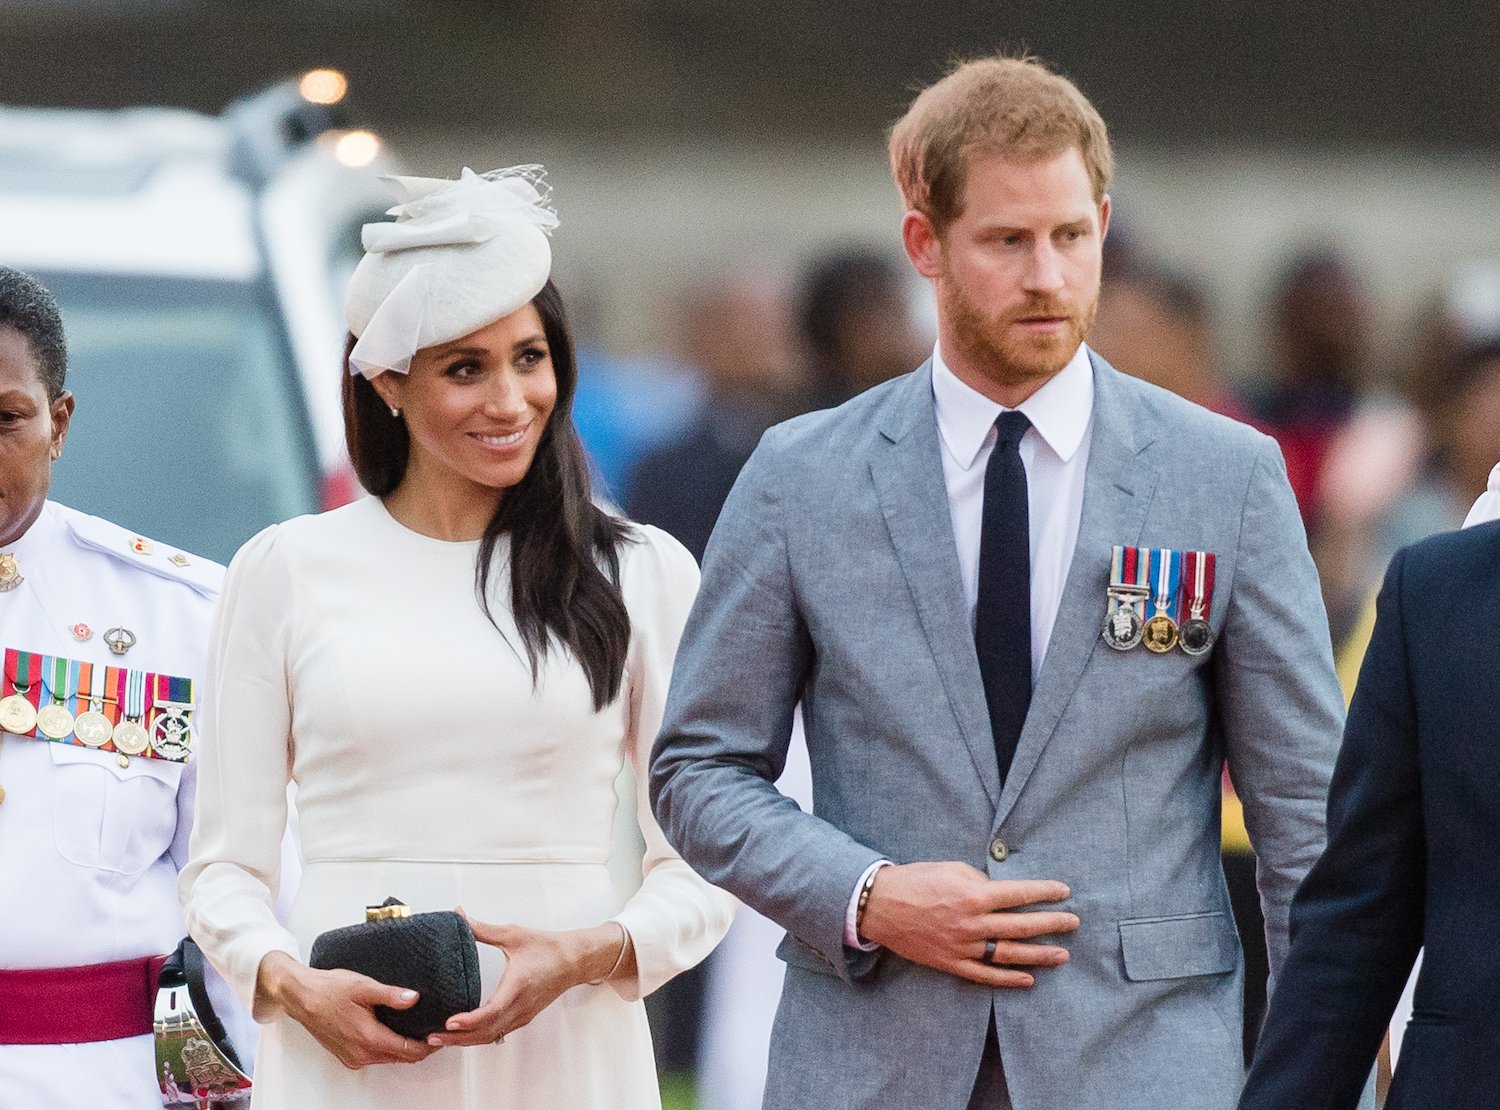 Prince Harry and Meghan Markle attend an official welcome ceremony in the city centre's Albert Park on October 23, 2018 in Suva, Fiji